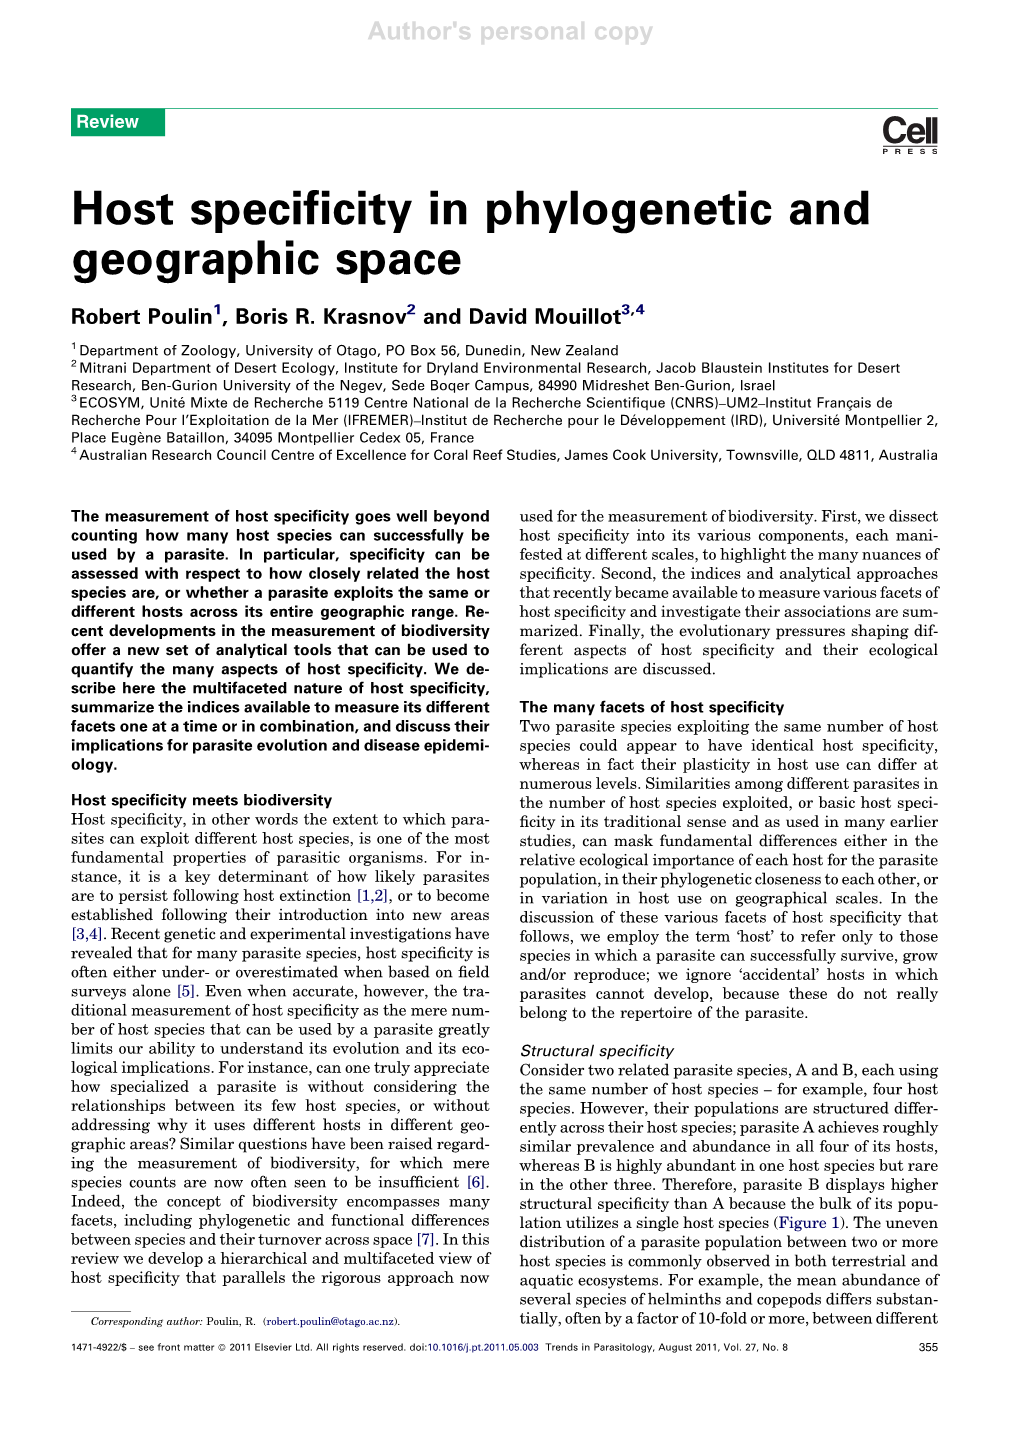 Host Specificity in Phylogenetic and Geographic Space